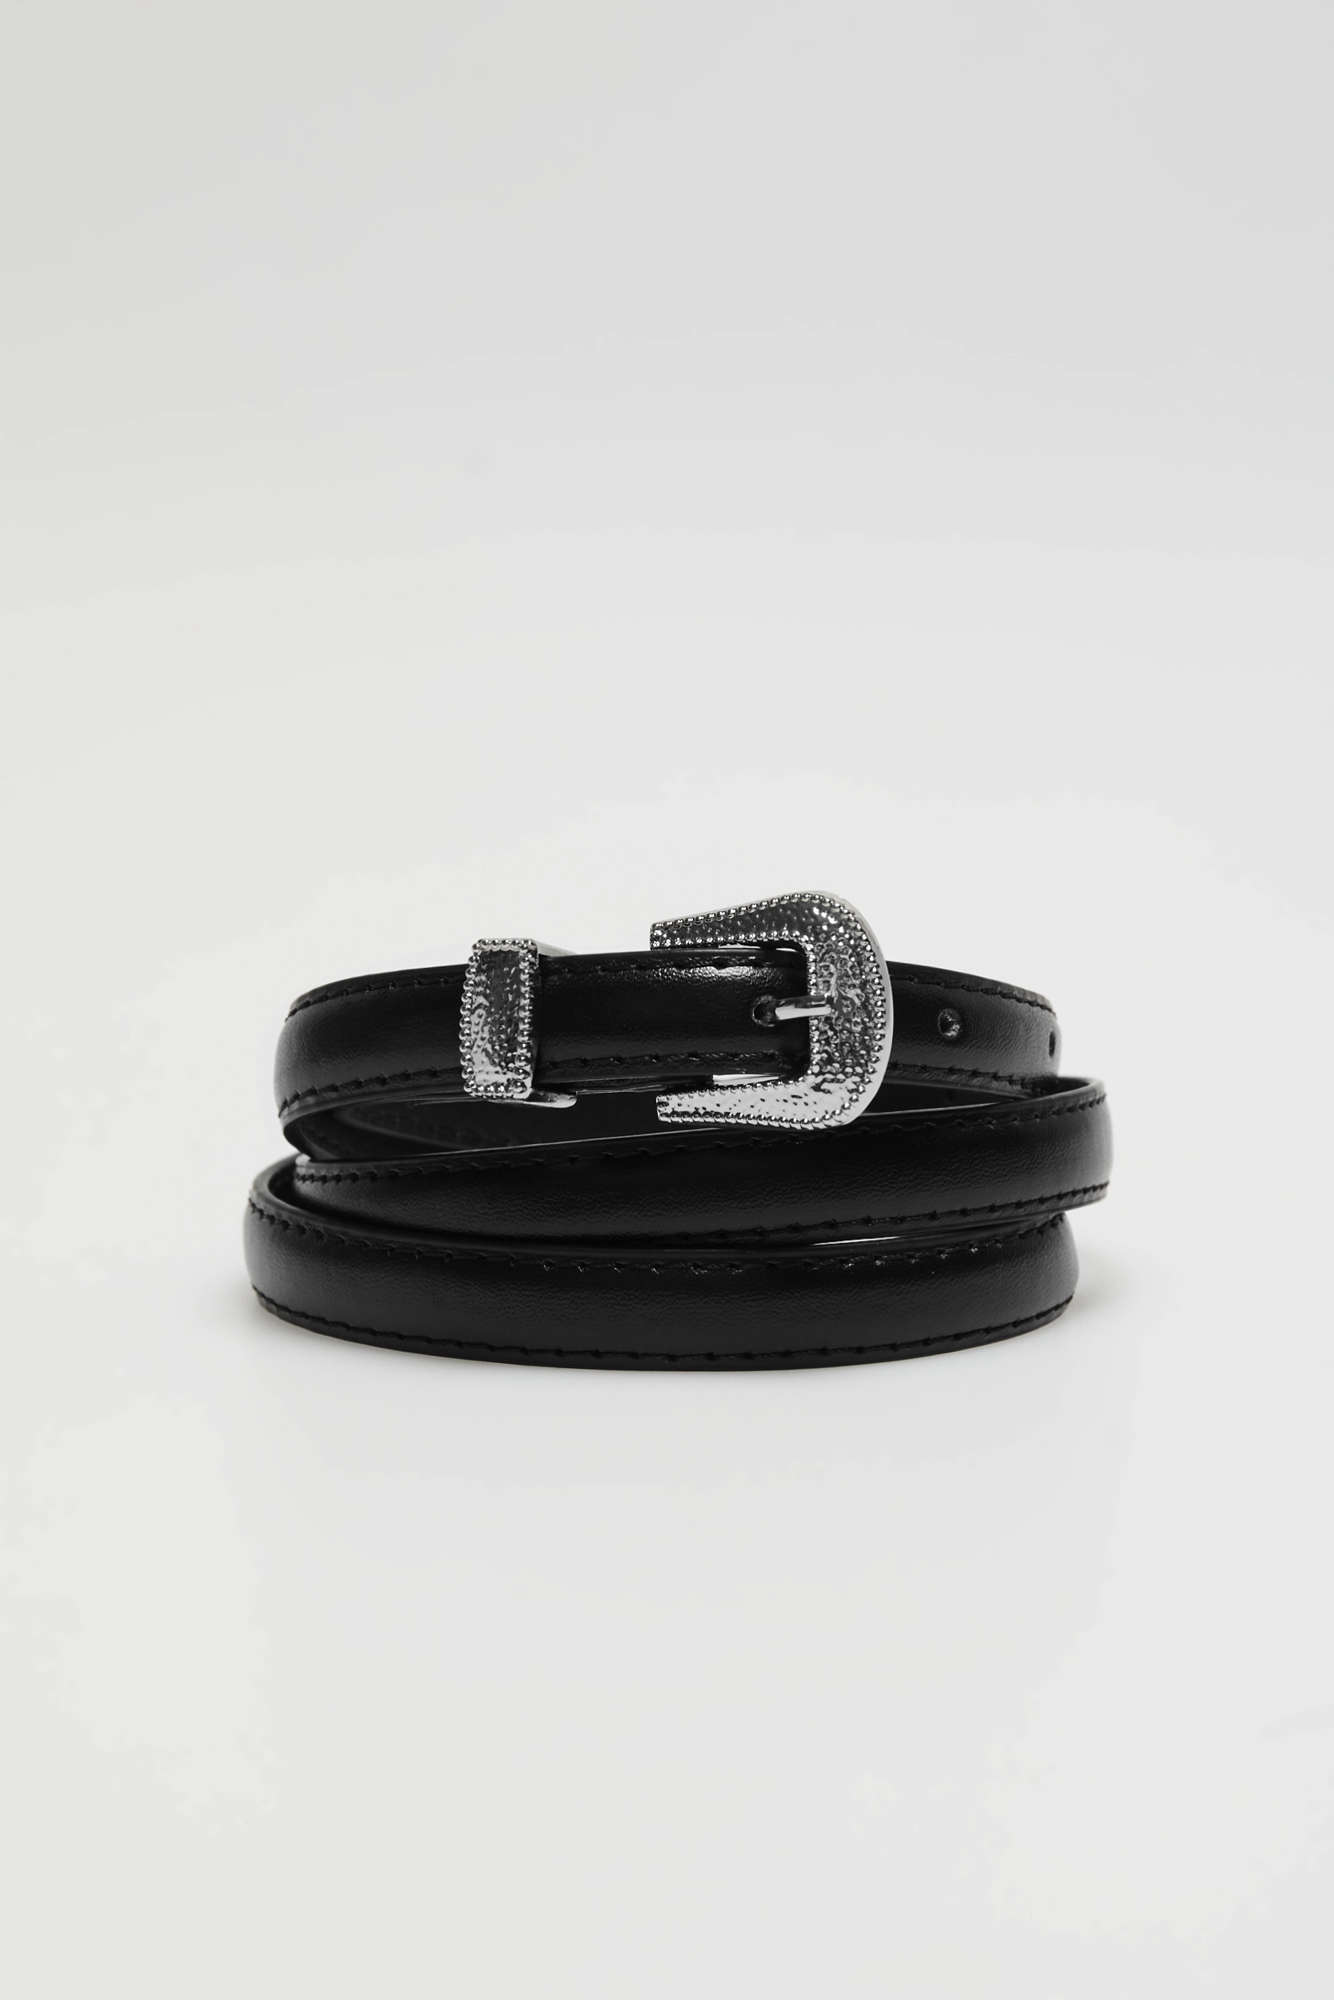 Thin belt with decorative buckle